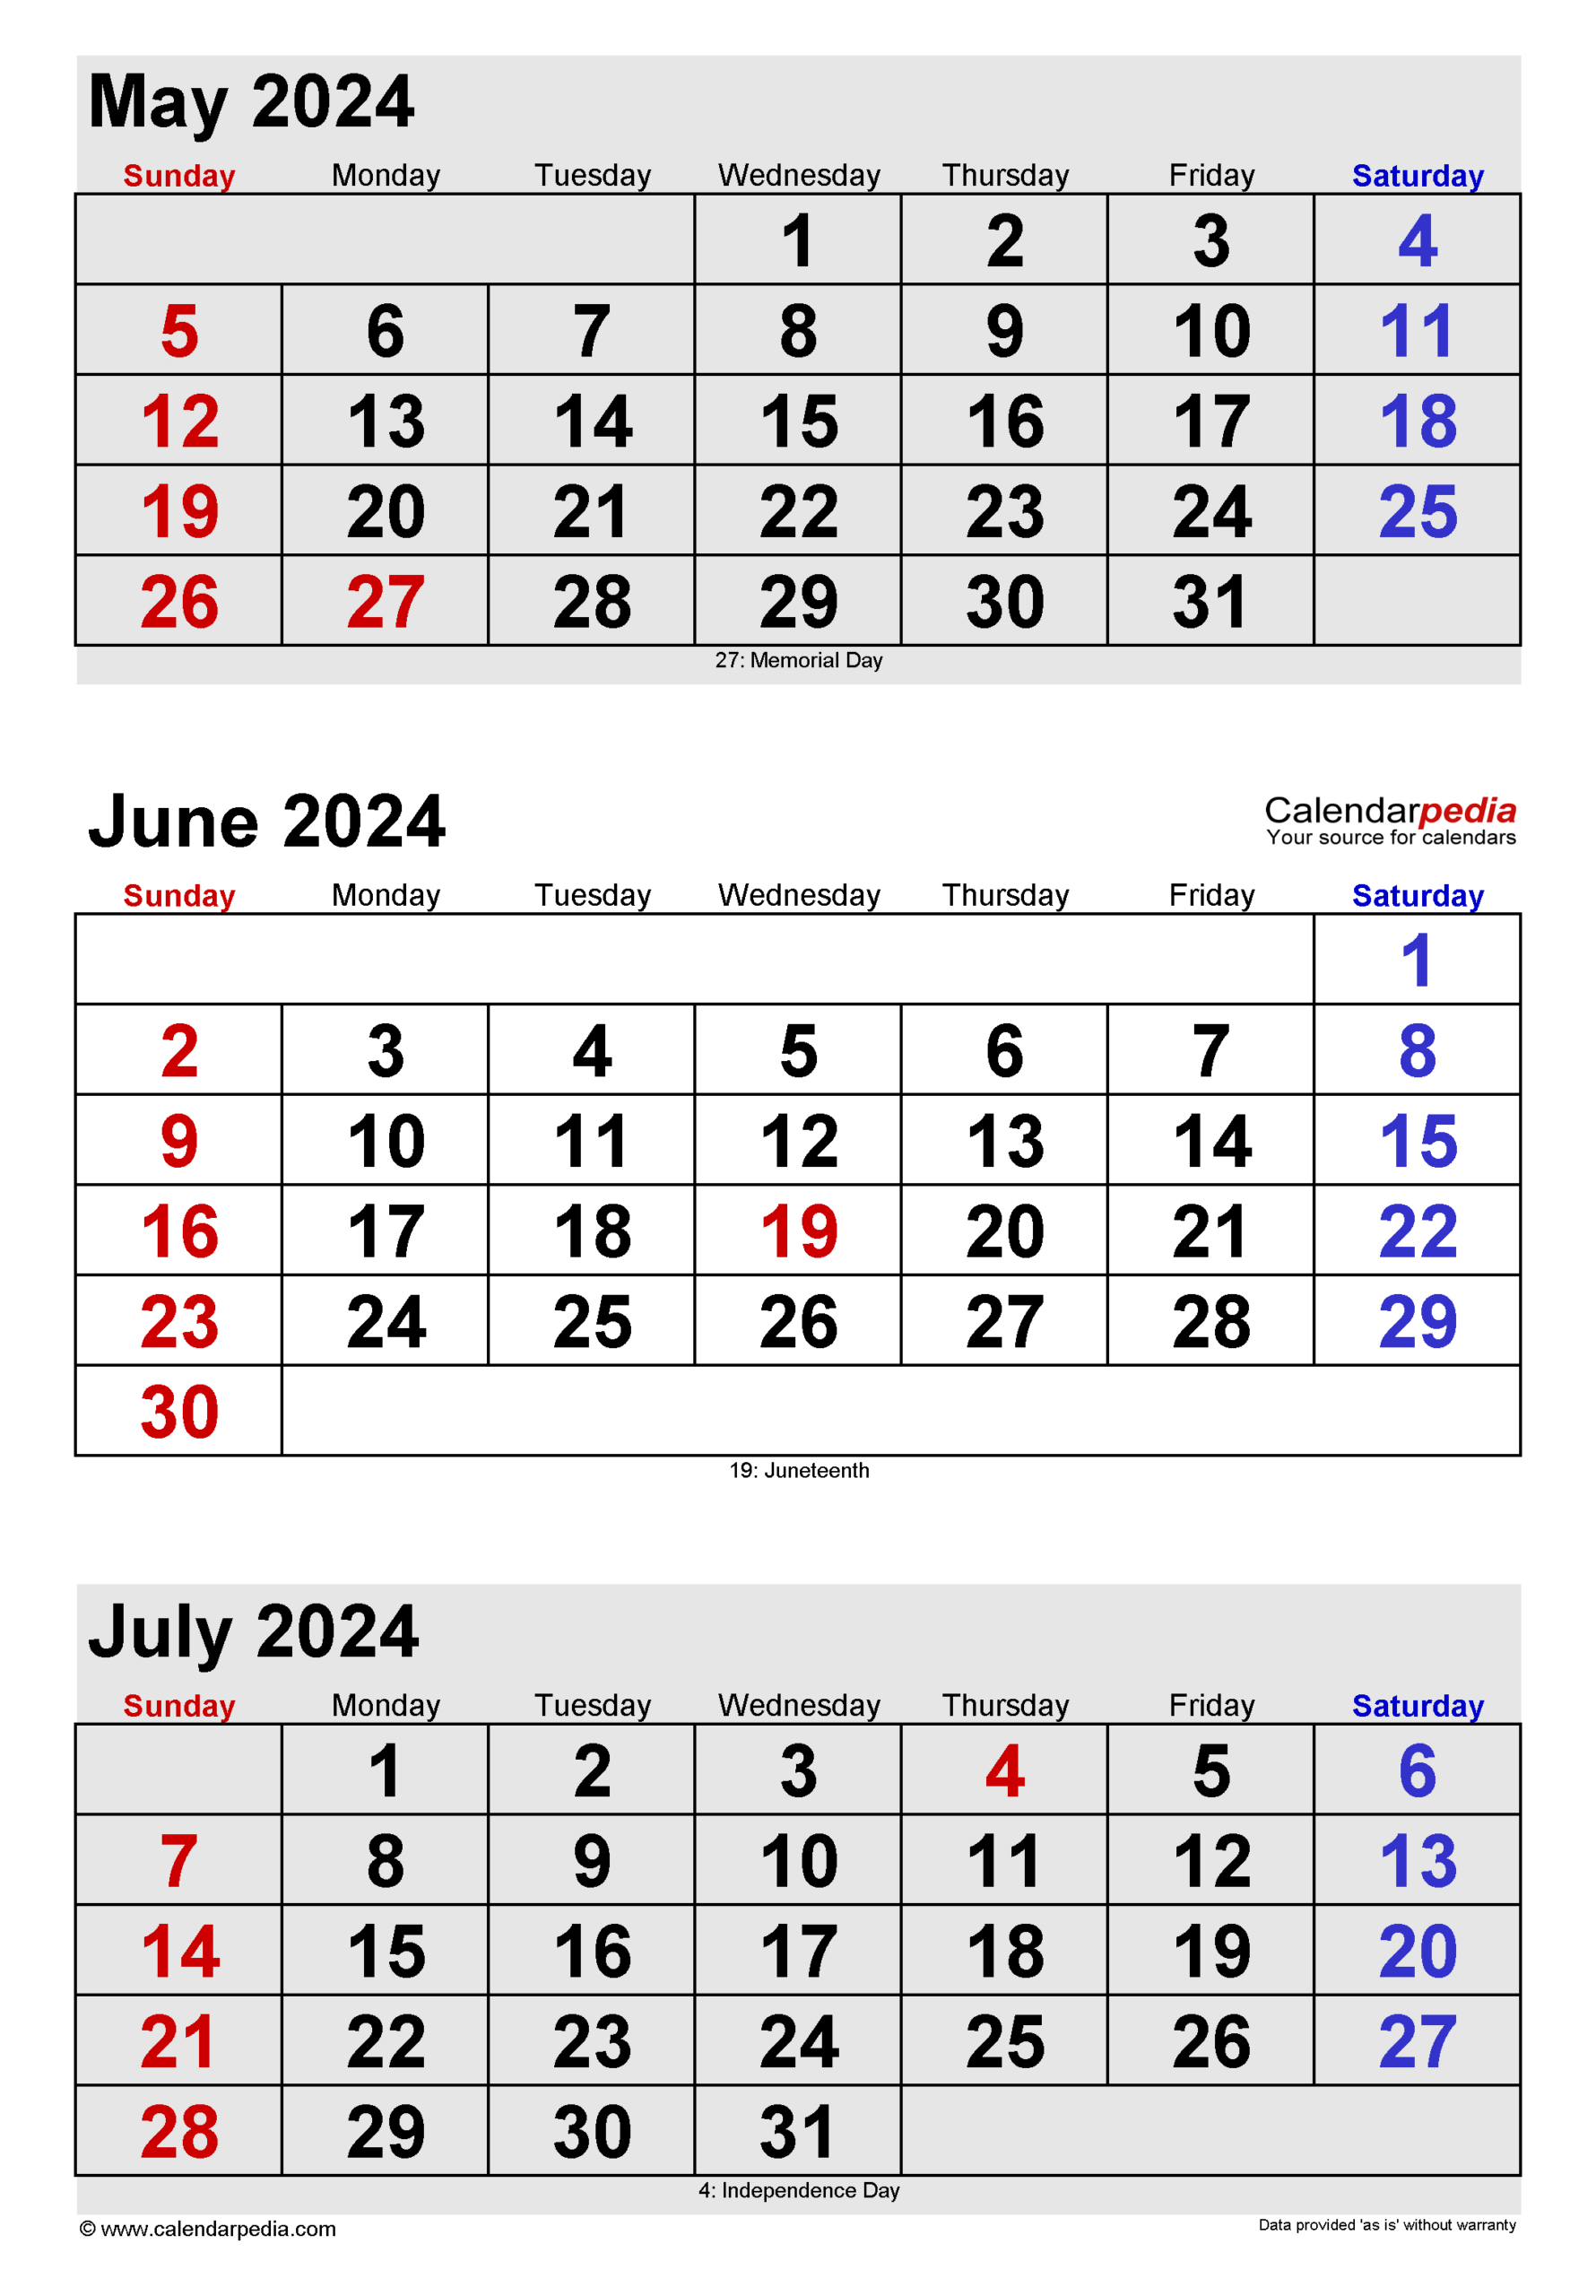 June 2024 Calendar | Templates For Word, Excel And Pdf intended for 2 Month Calendar June July 2024